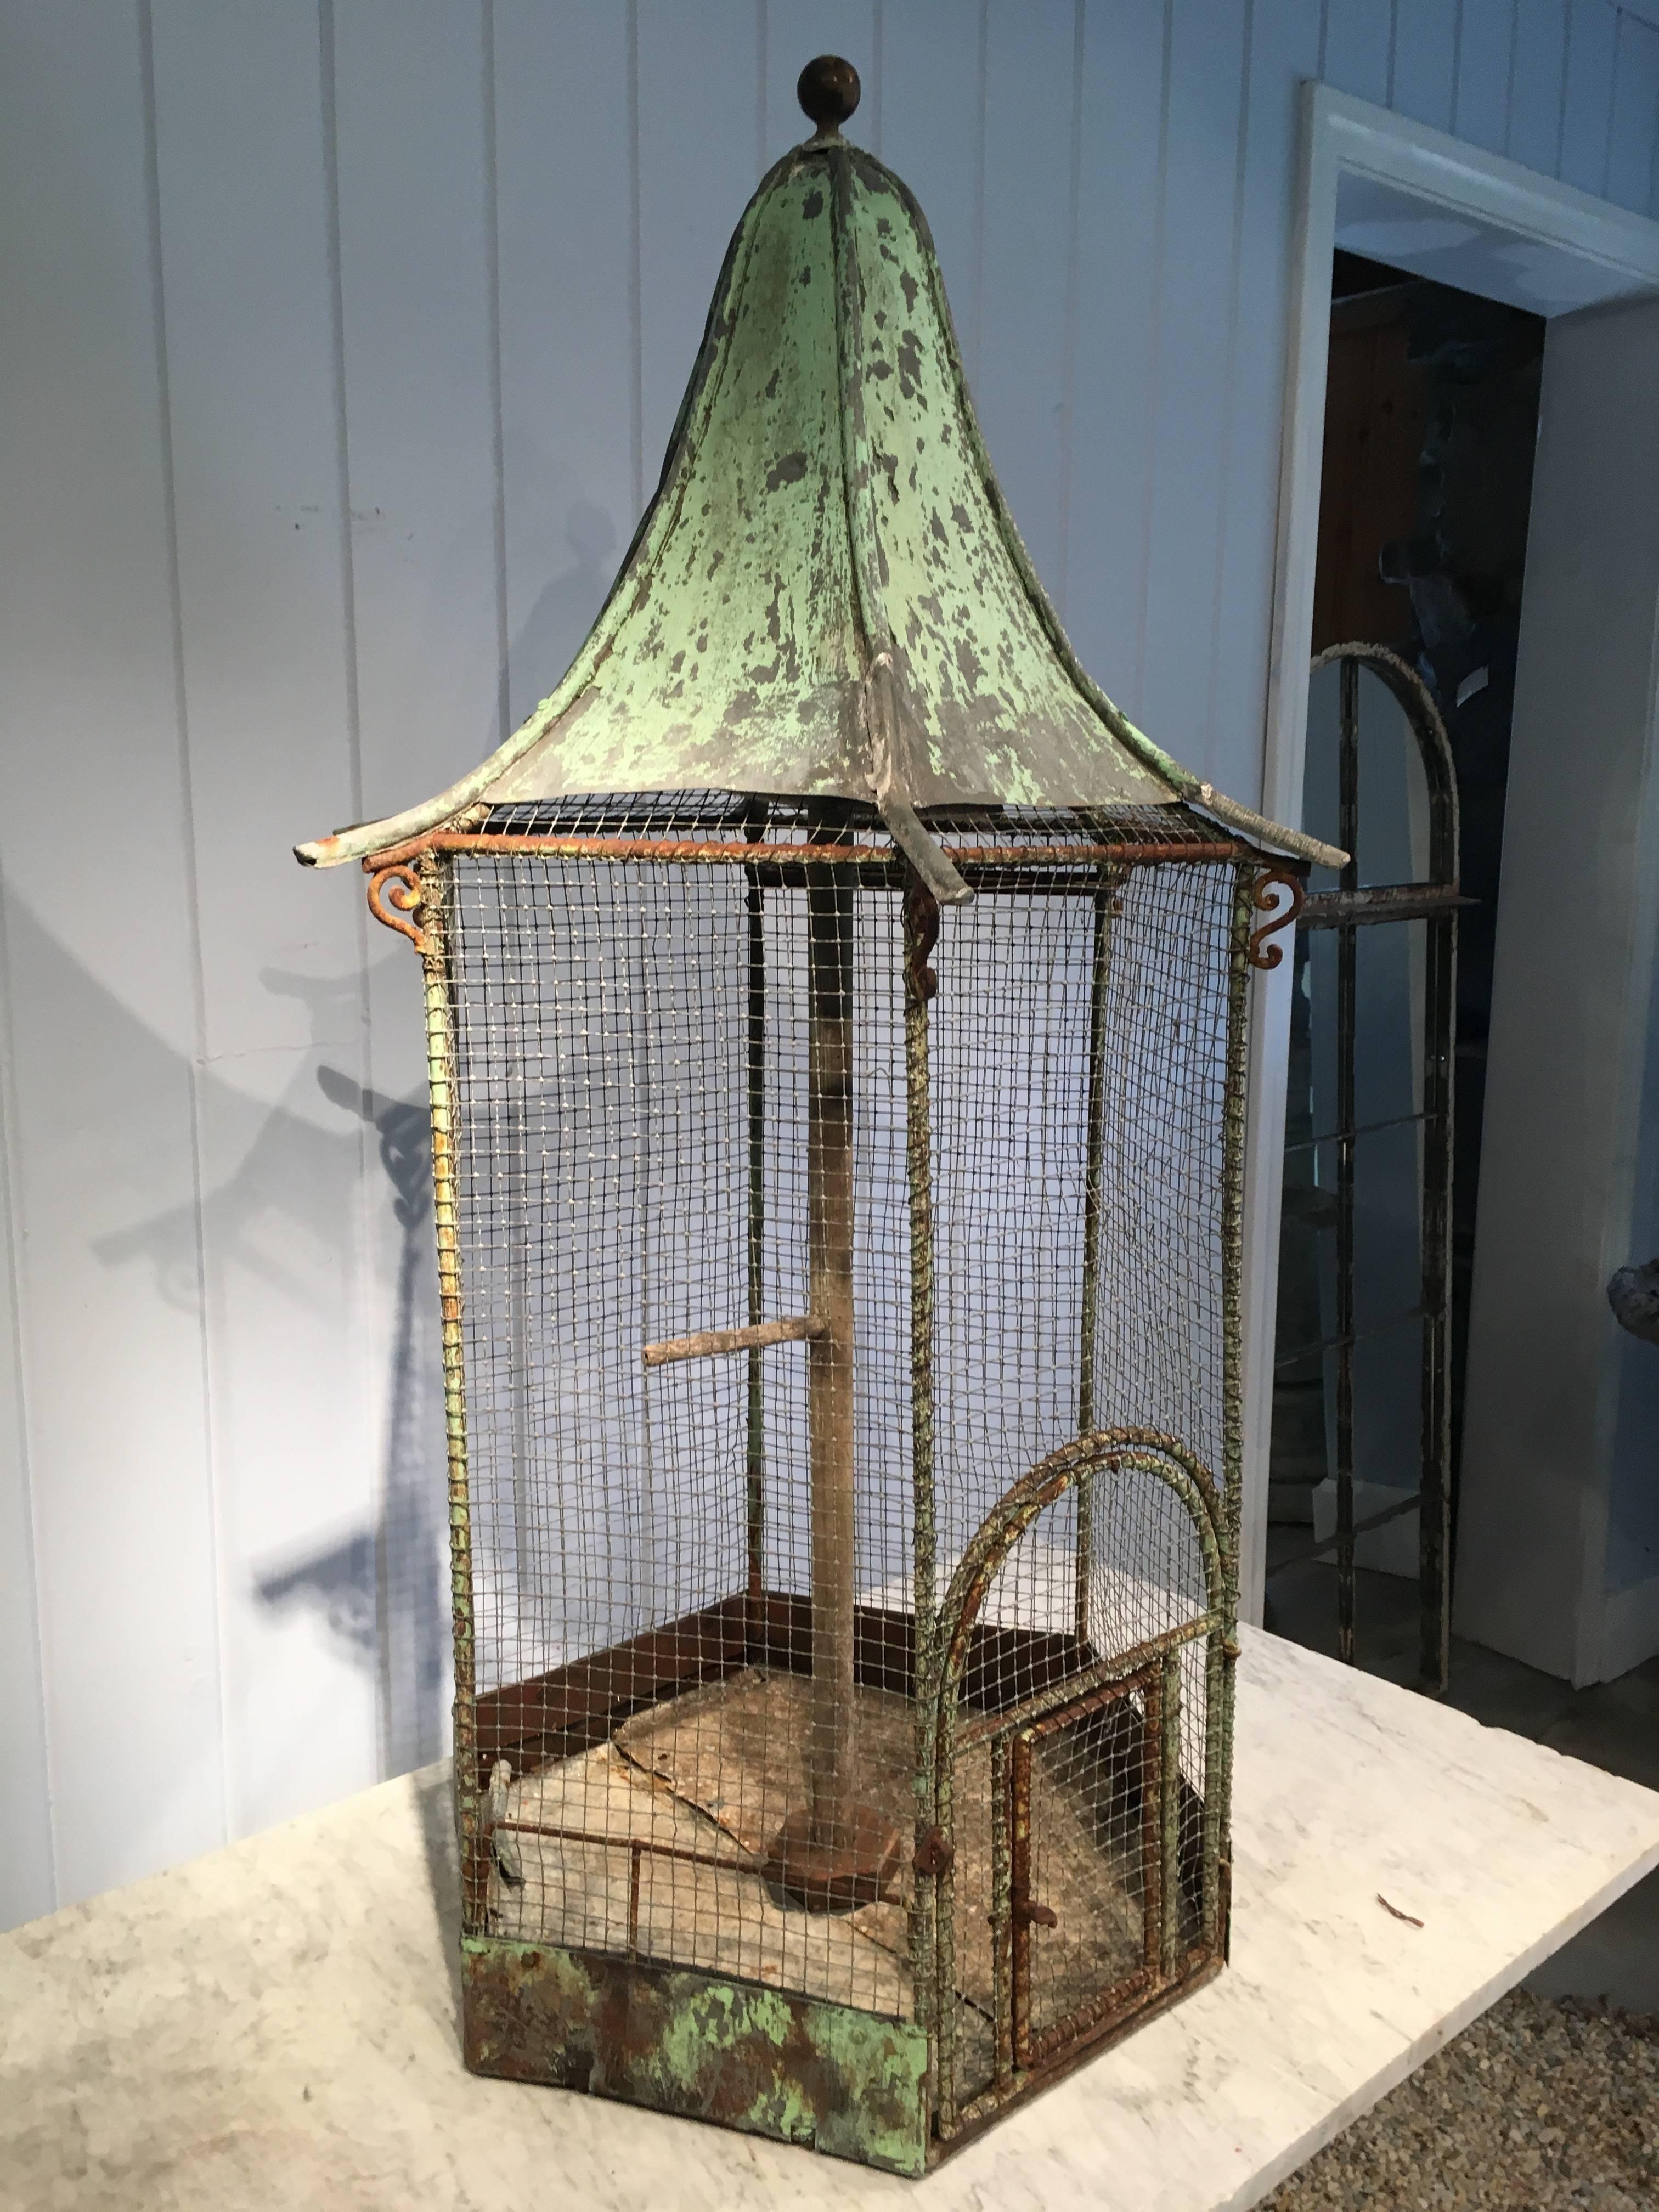 We adore the weathered green painted surface of this unusual hexagonal-shaped zinc birdcage as well as its all-original condition. The pagoda-shaped roof with round finial is stunning and has lovely outwardly-sloping edges with little scrolled